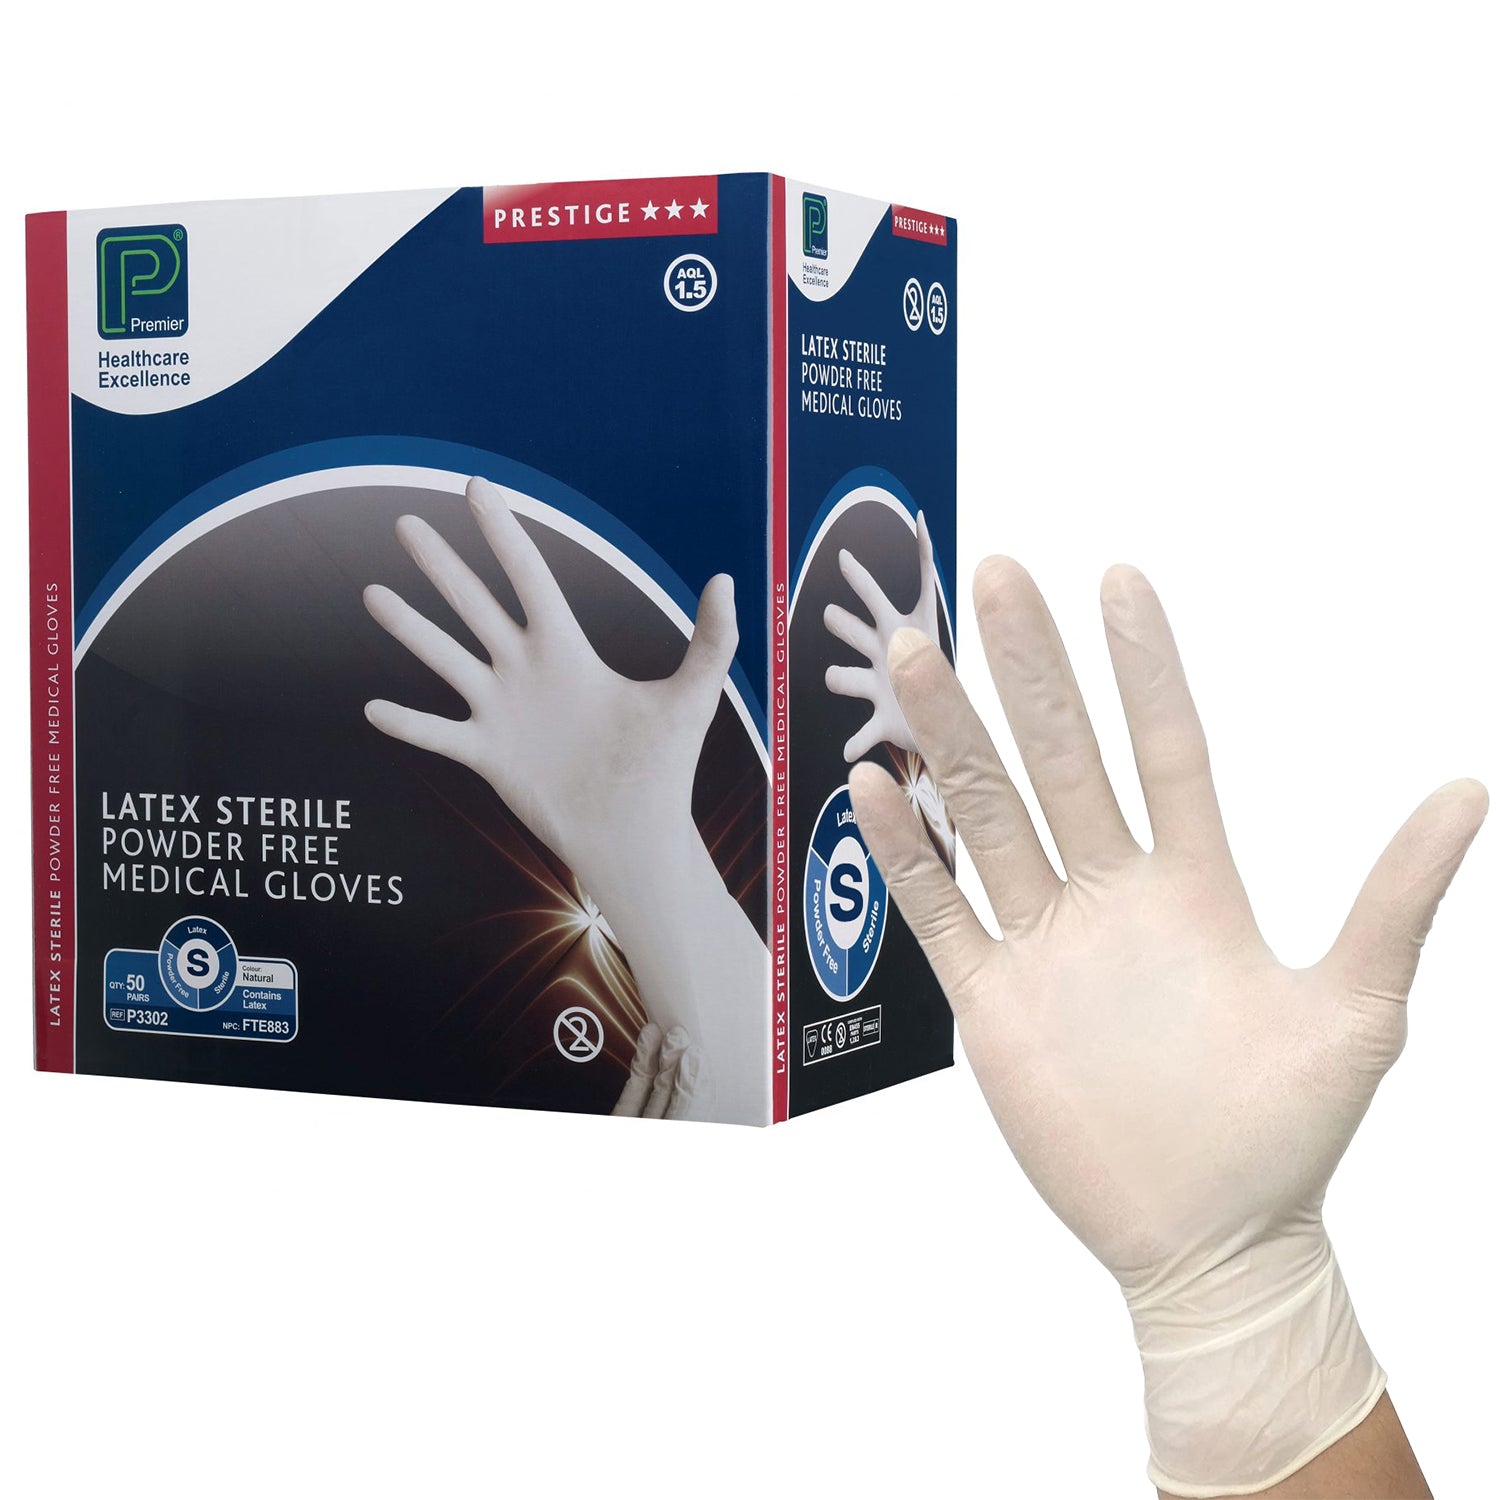 Premier Latex Sterile Powder Free Gloves | Small | Pack of 50 pairs (1)